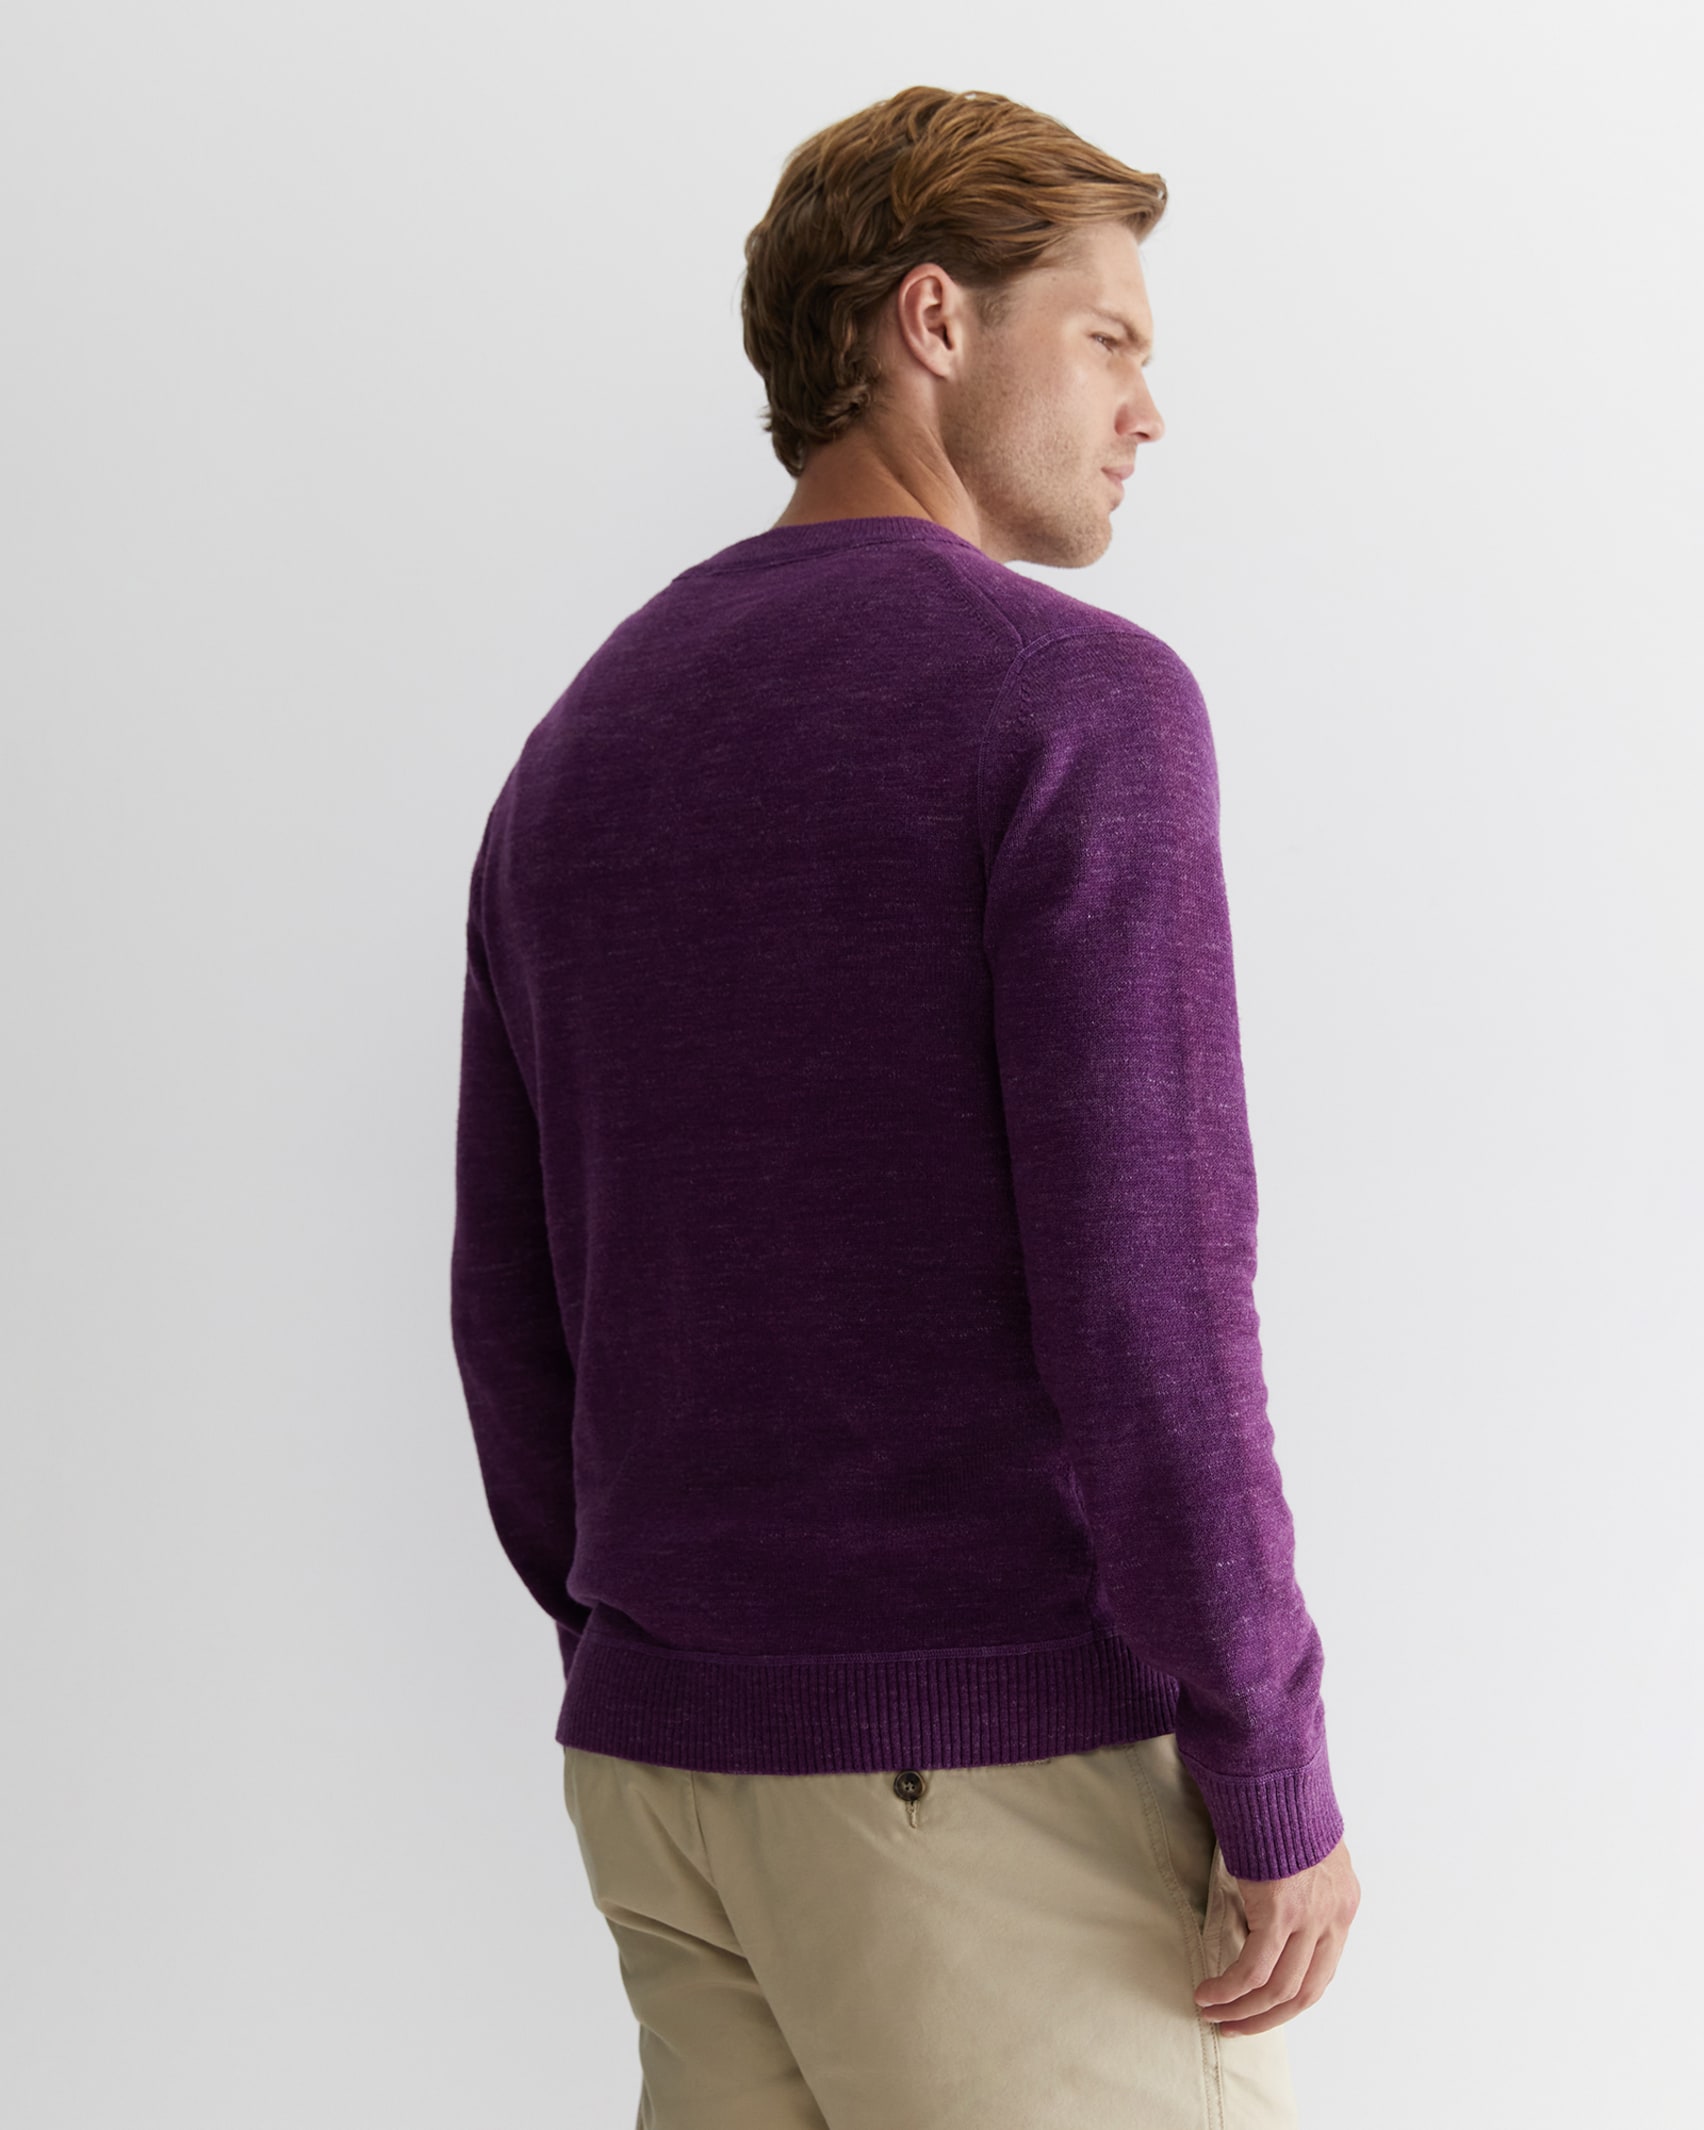 Oliver Crew Neck Knit in ROYAL PURPLE